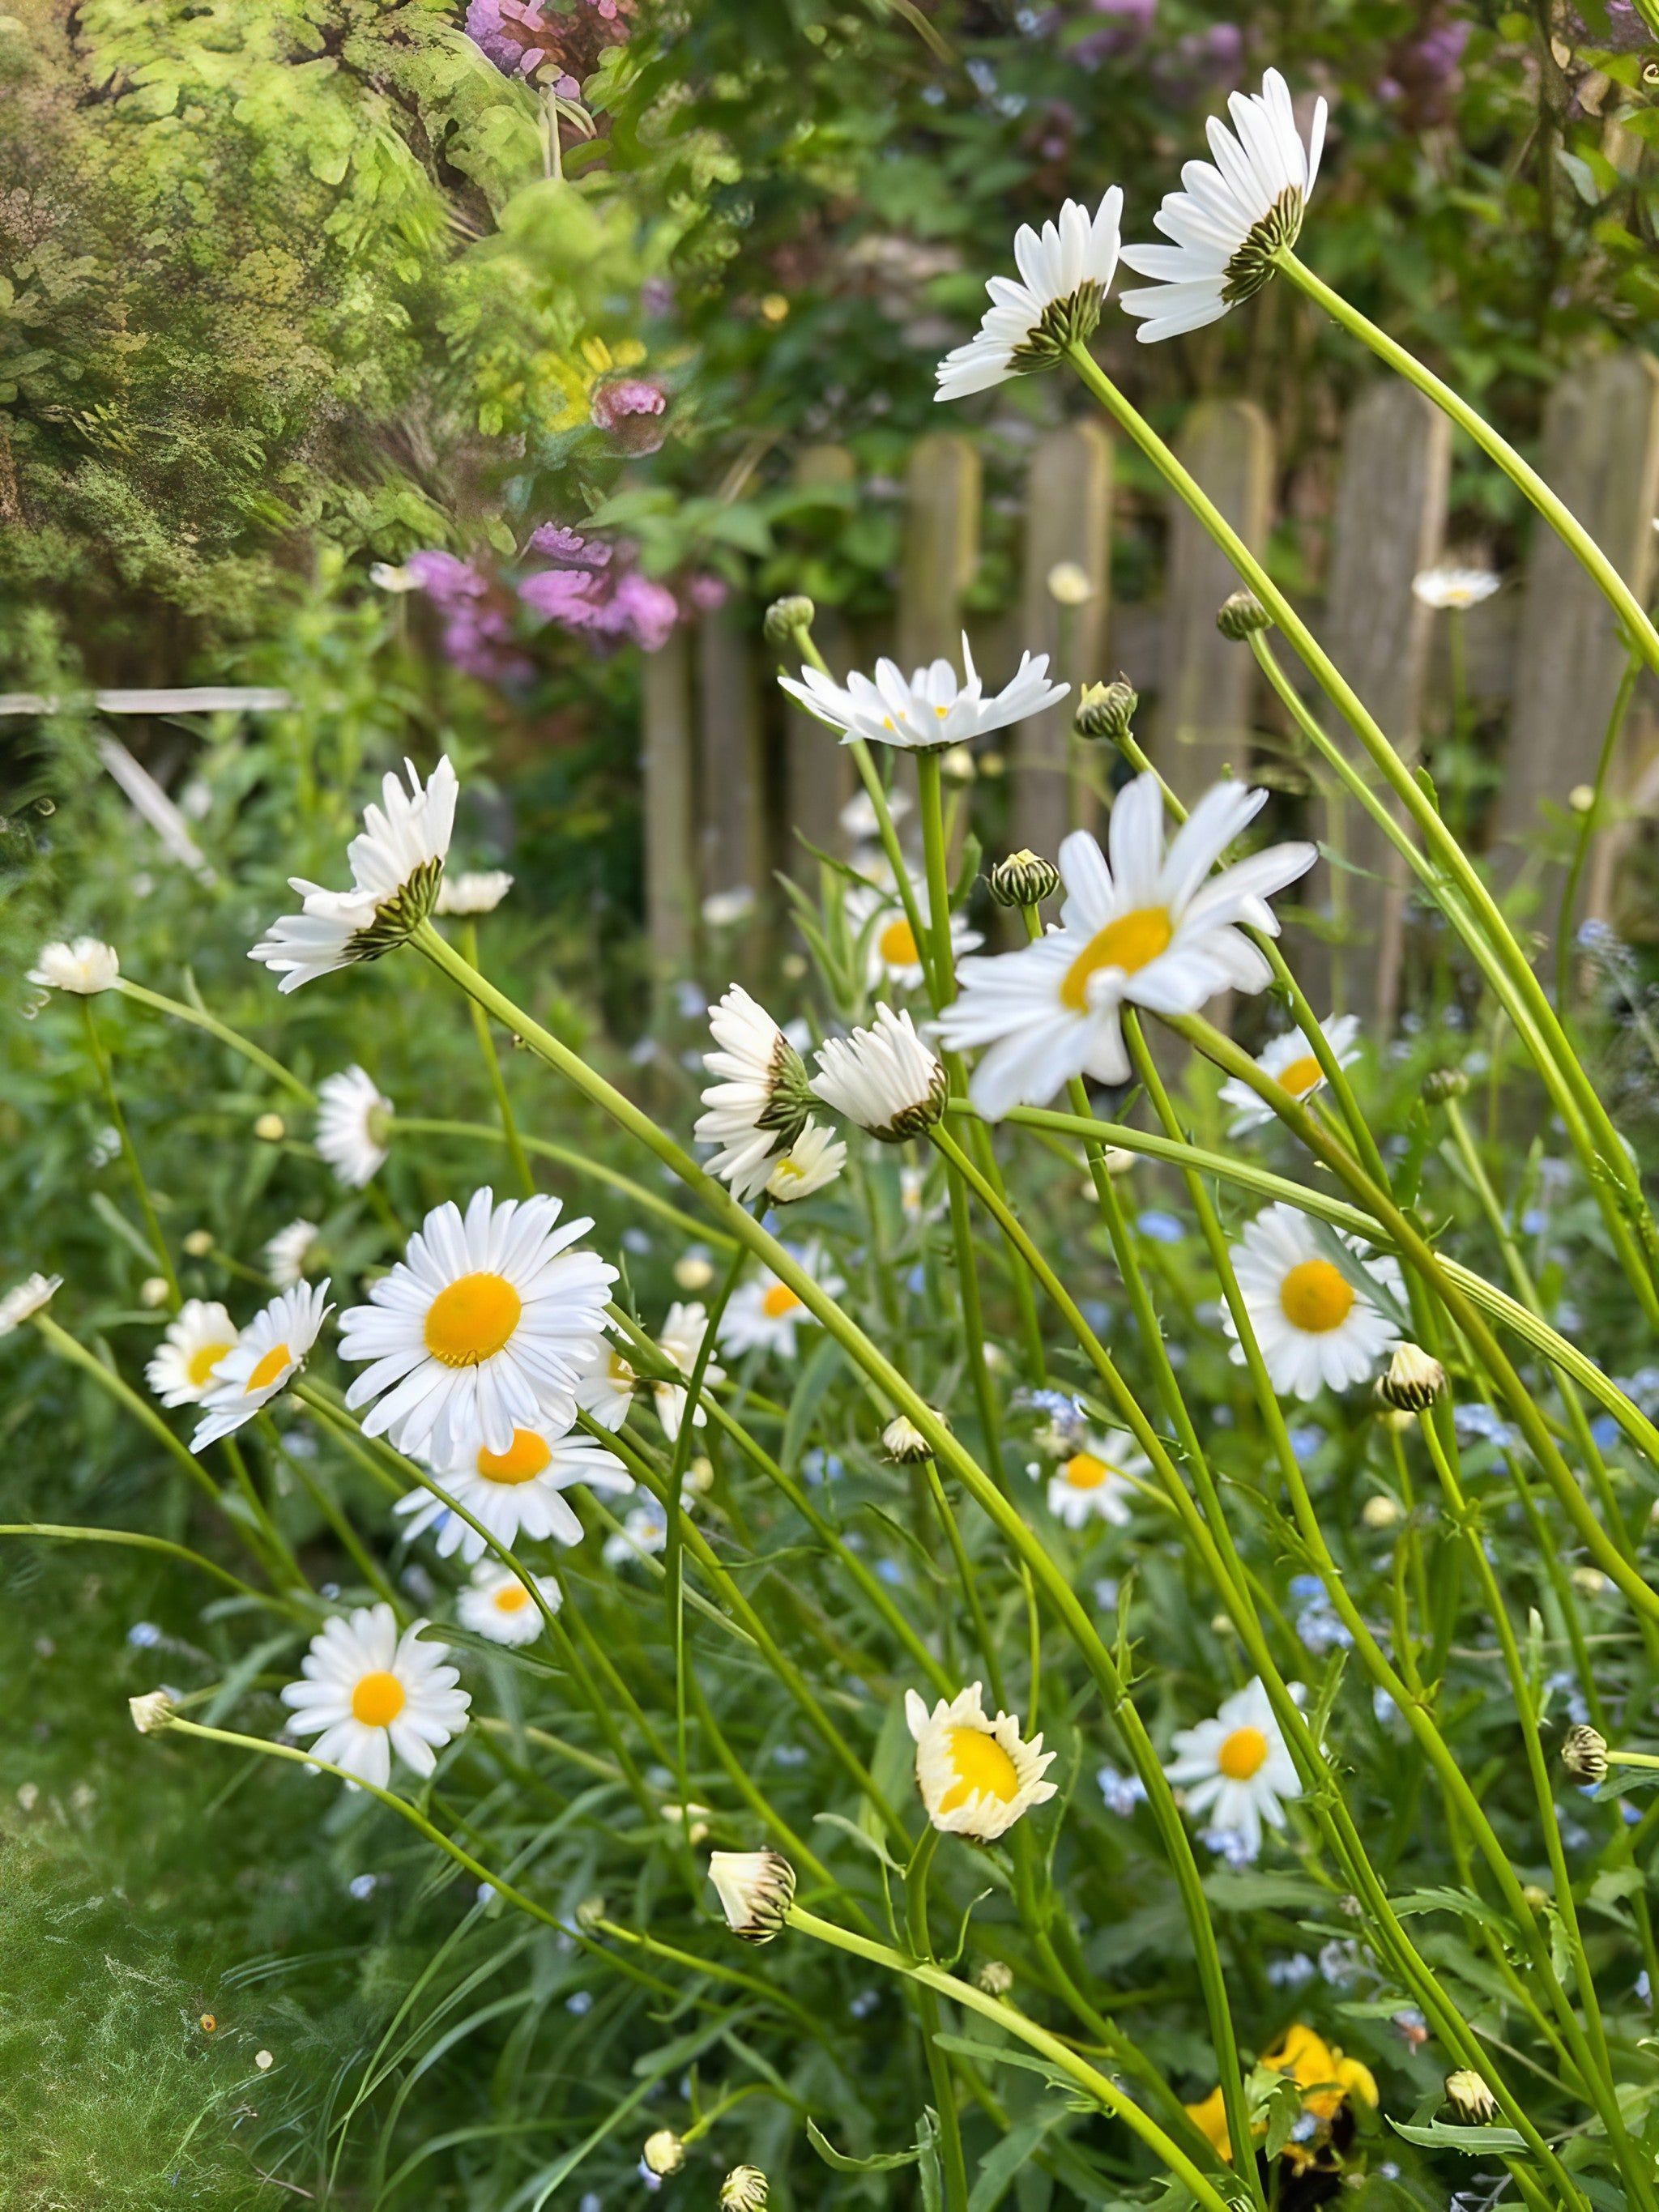 Cluster of Oxeye Daisy blooms in a lush garden